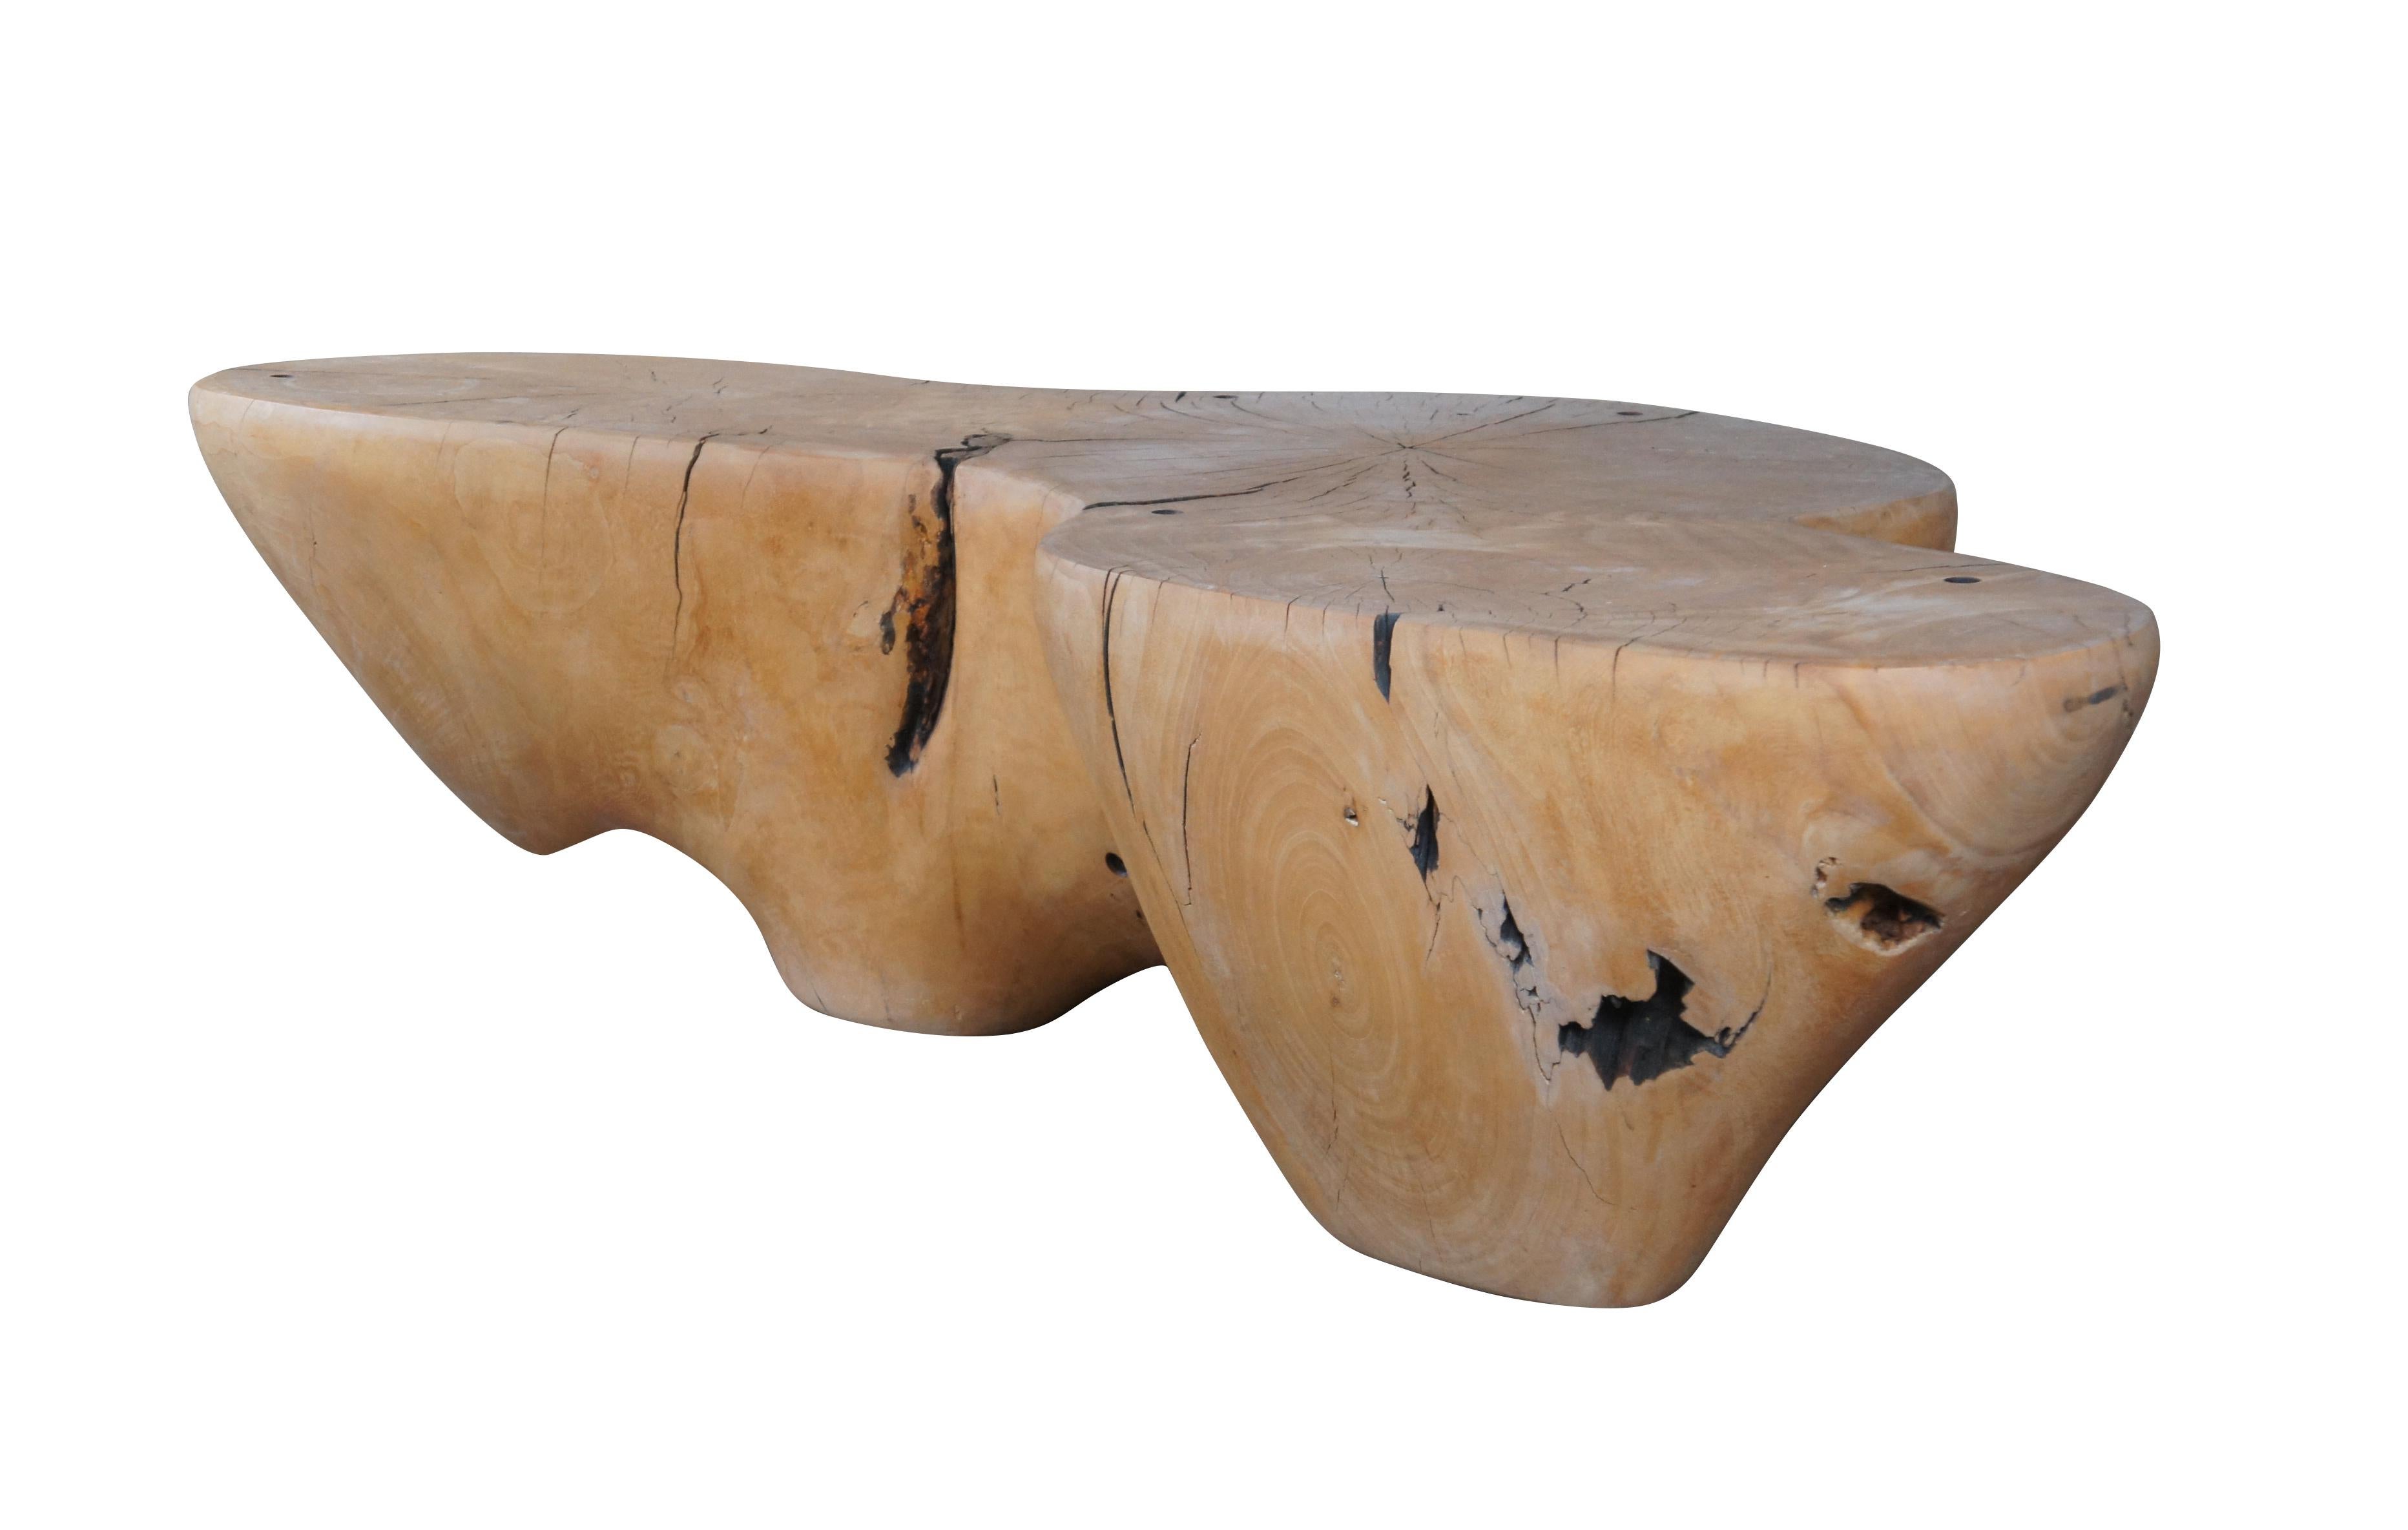 A natural Ash root table, circa 1960s. Features a free-form design with a blend of rustic and modern styling. Smoothly finished allowing the woodgrain to show through.